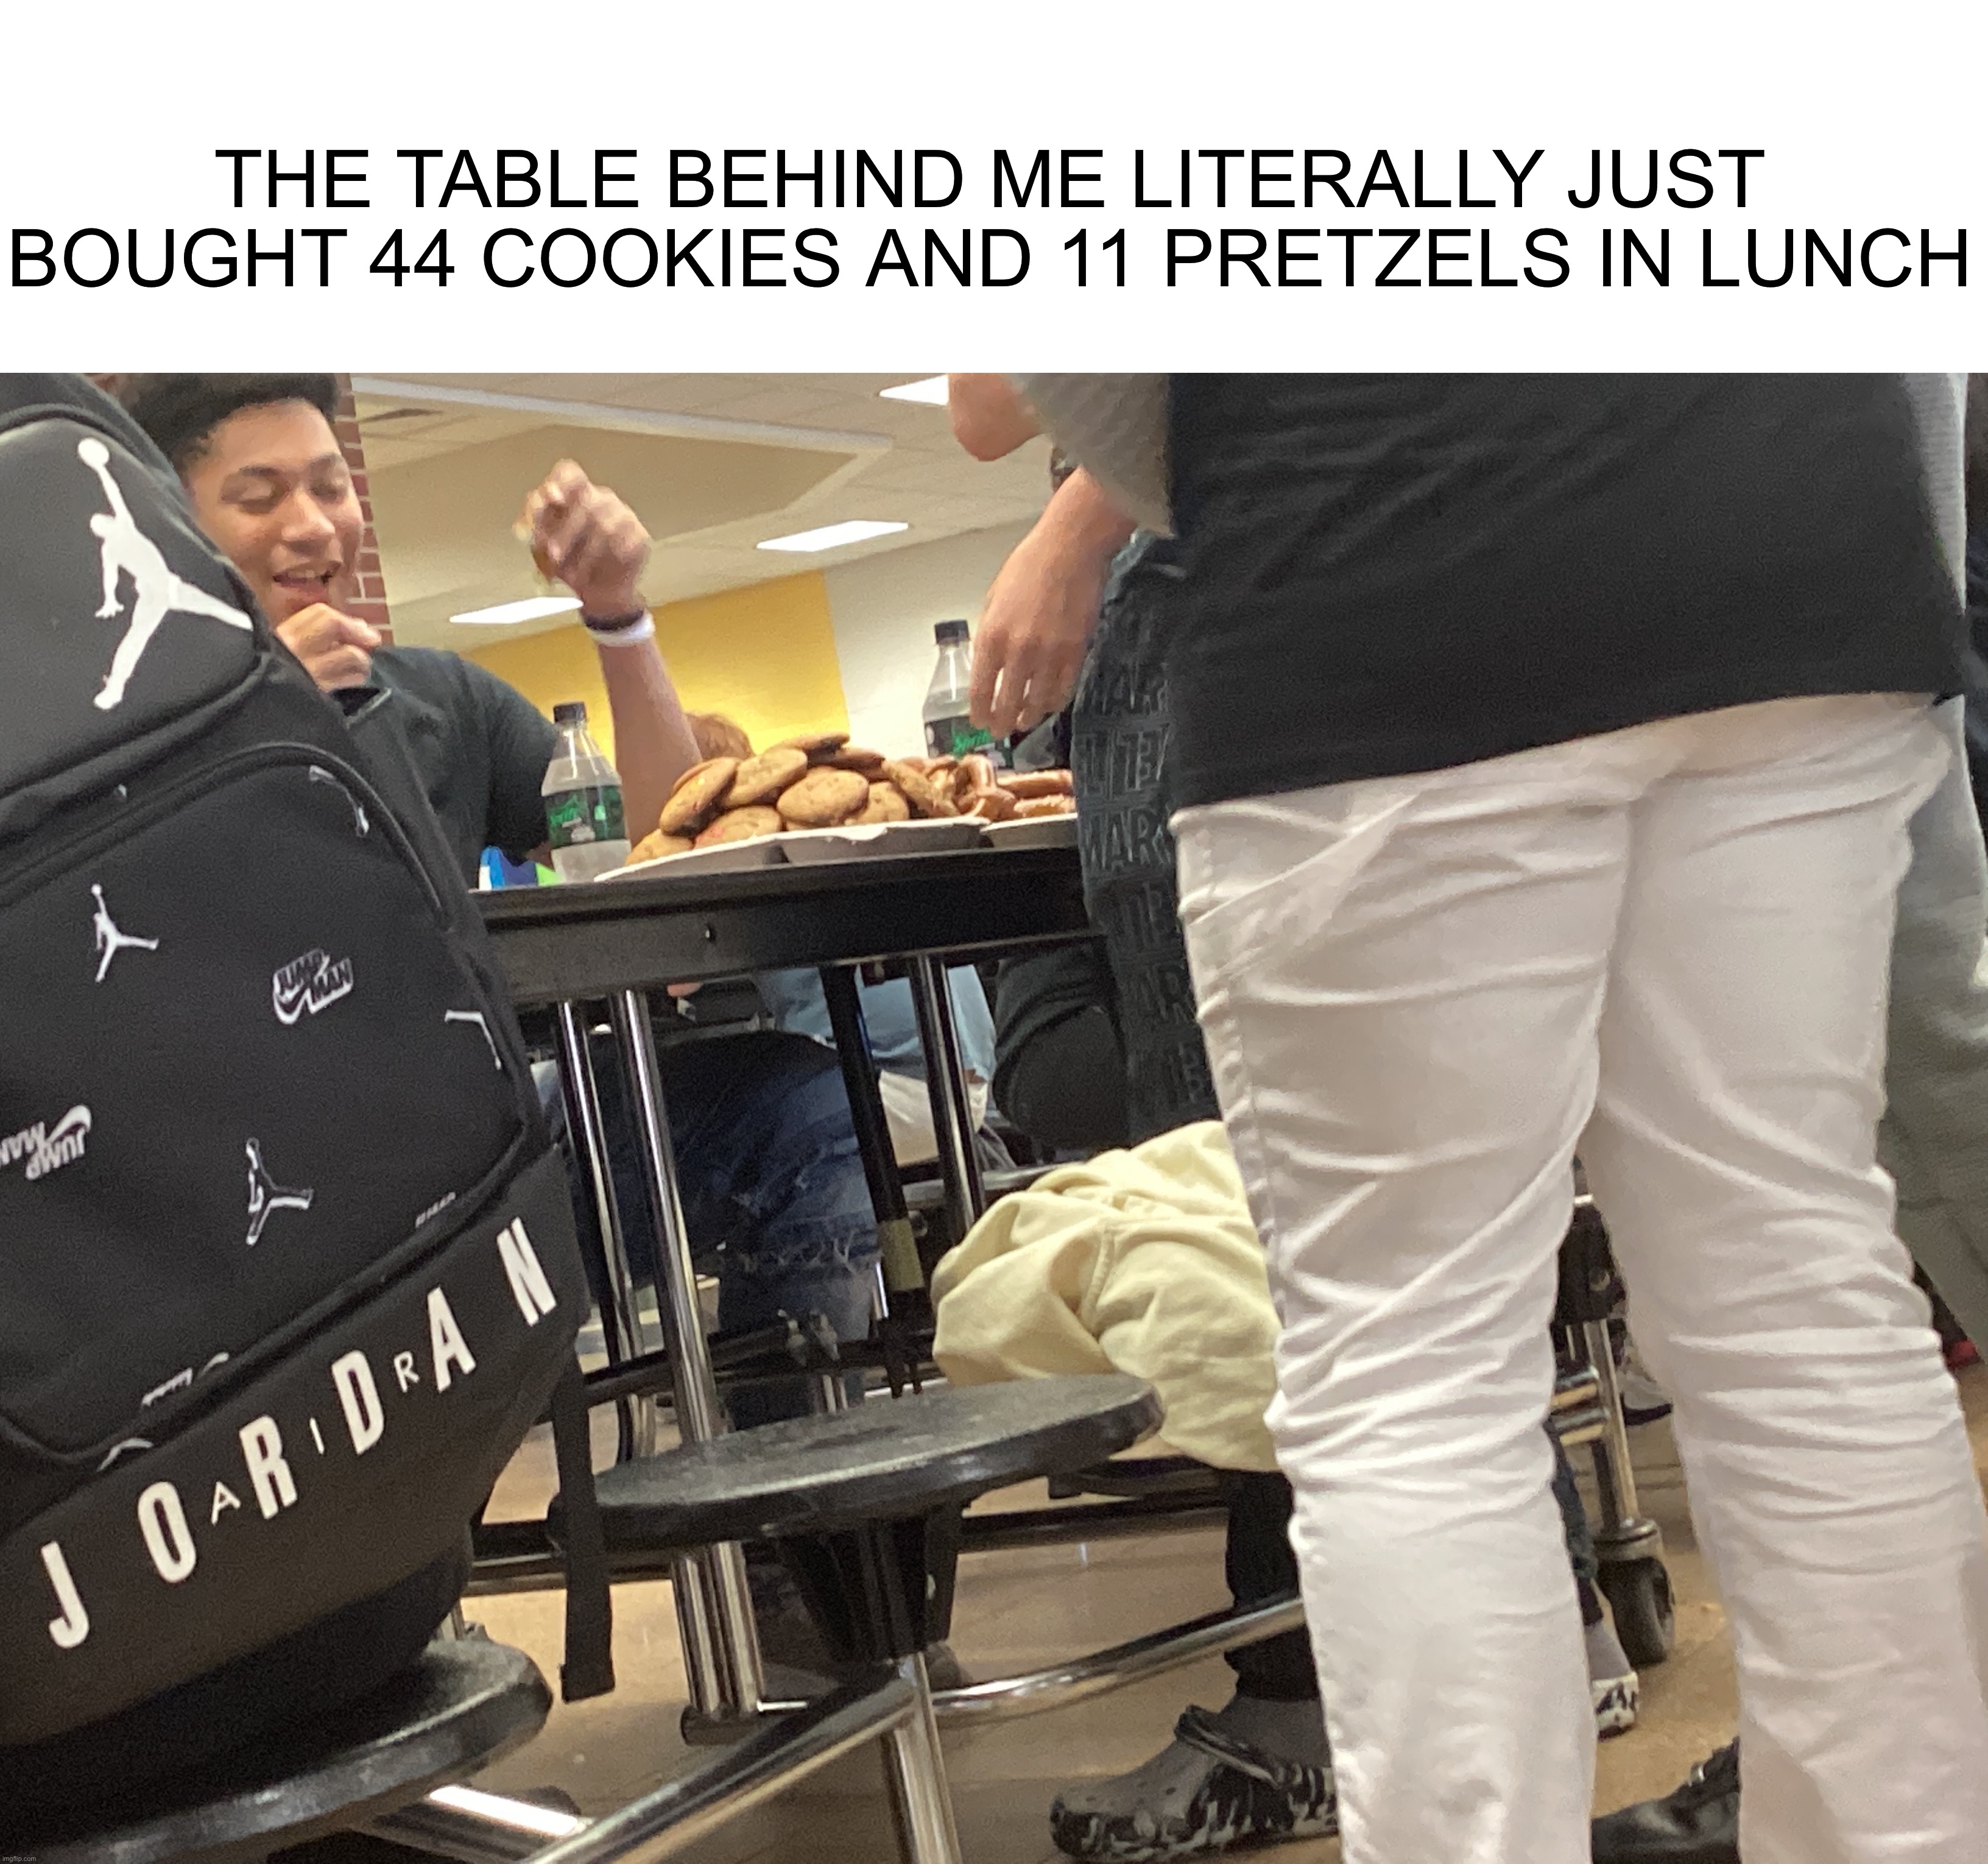 What the actual hell | THE TABLE BEHIND ME LITERALLY JUST BOUGHT 44 COOKIES AND 11 PRETZELS IN LUNCH | image tagged in wtf | made w/ Imgflip meme maker